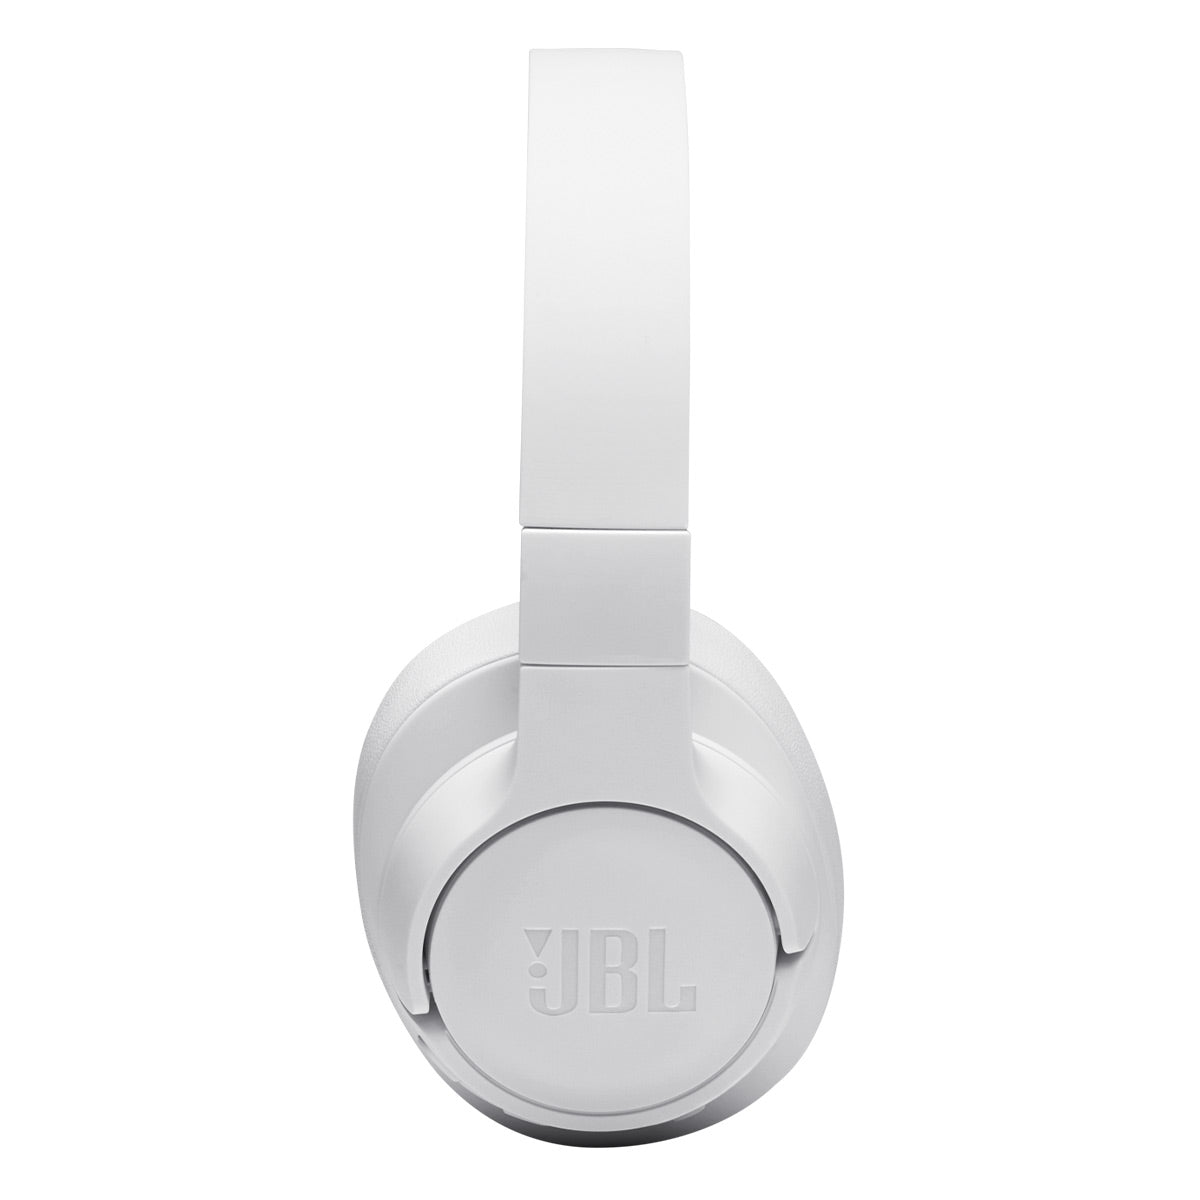  JBL Tune 710BT Wireless Over-Ear Bluetooth Headphones with  Microphone, 50H Battery, Hands-Free Calls, Portable (Blue) : Electronics